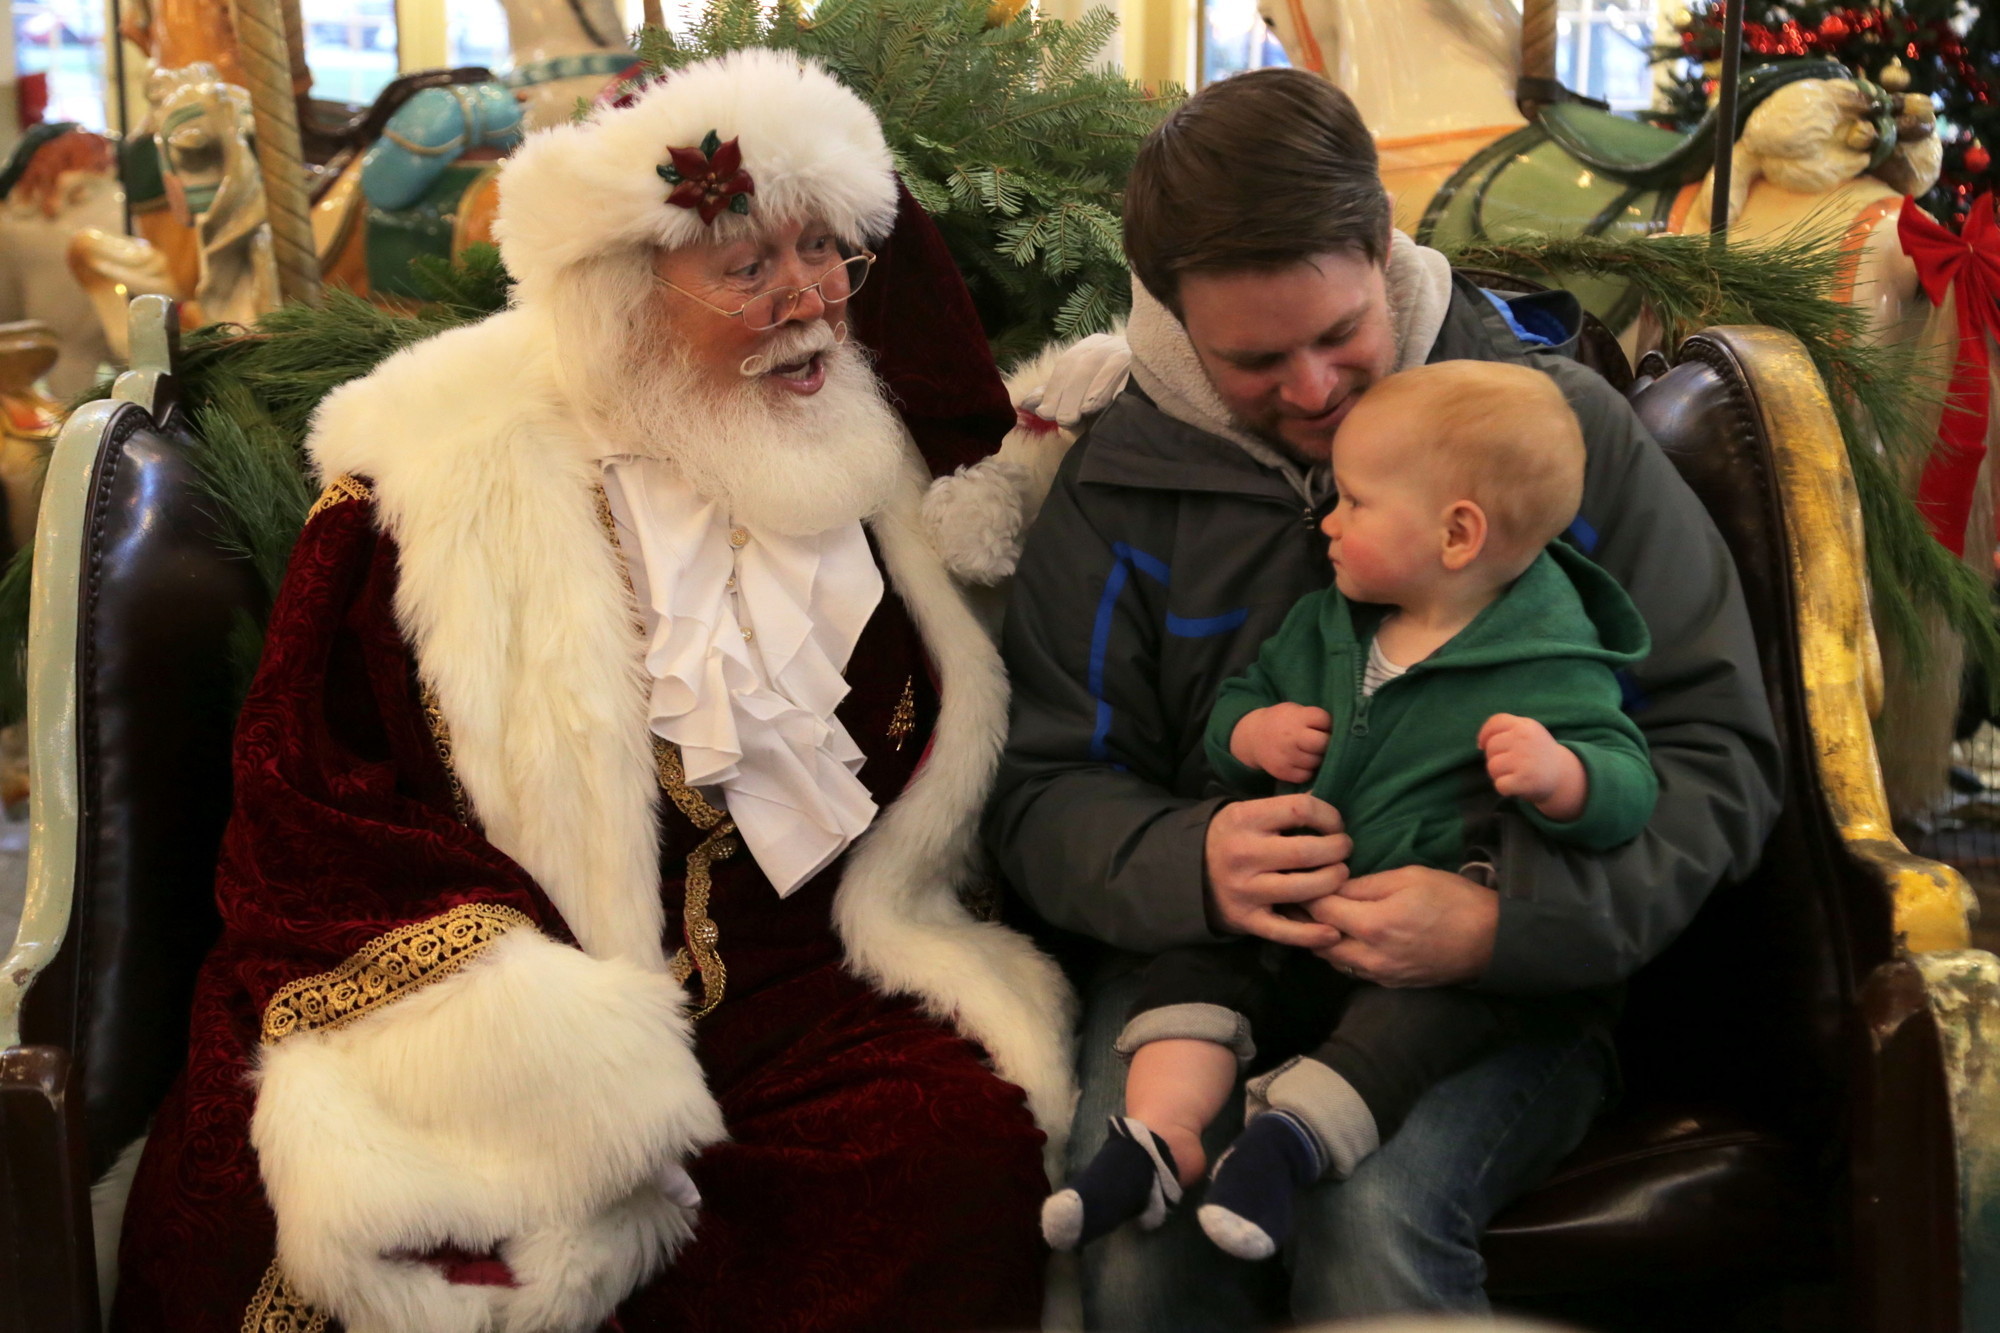 One year old Drew Coutu sits with Santa Claus inside the Crescent Park Carousel.